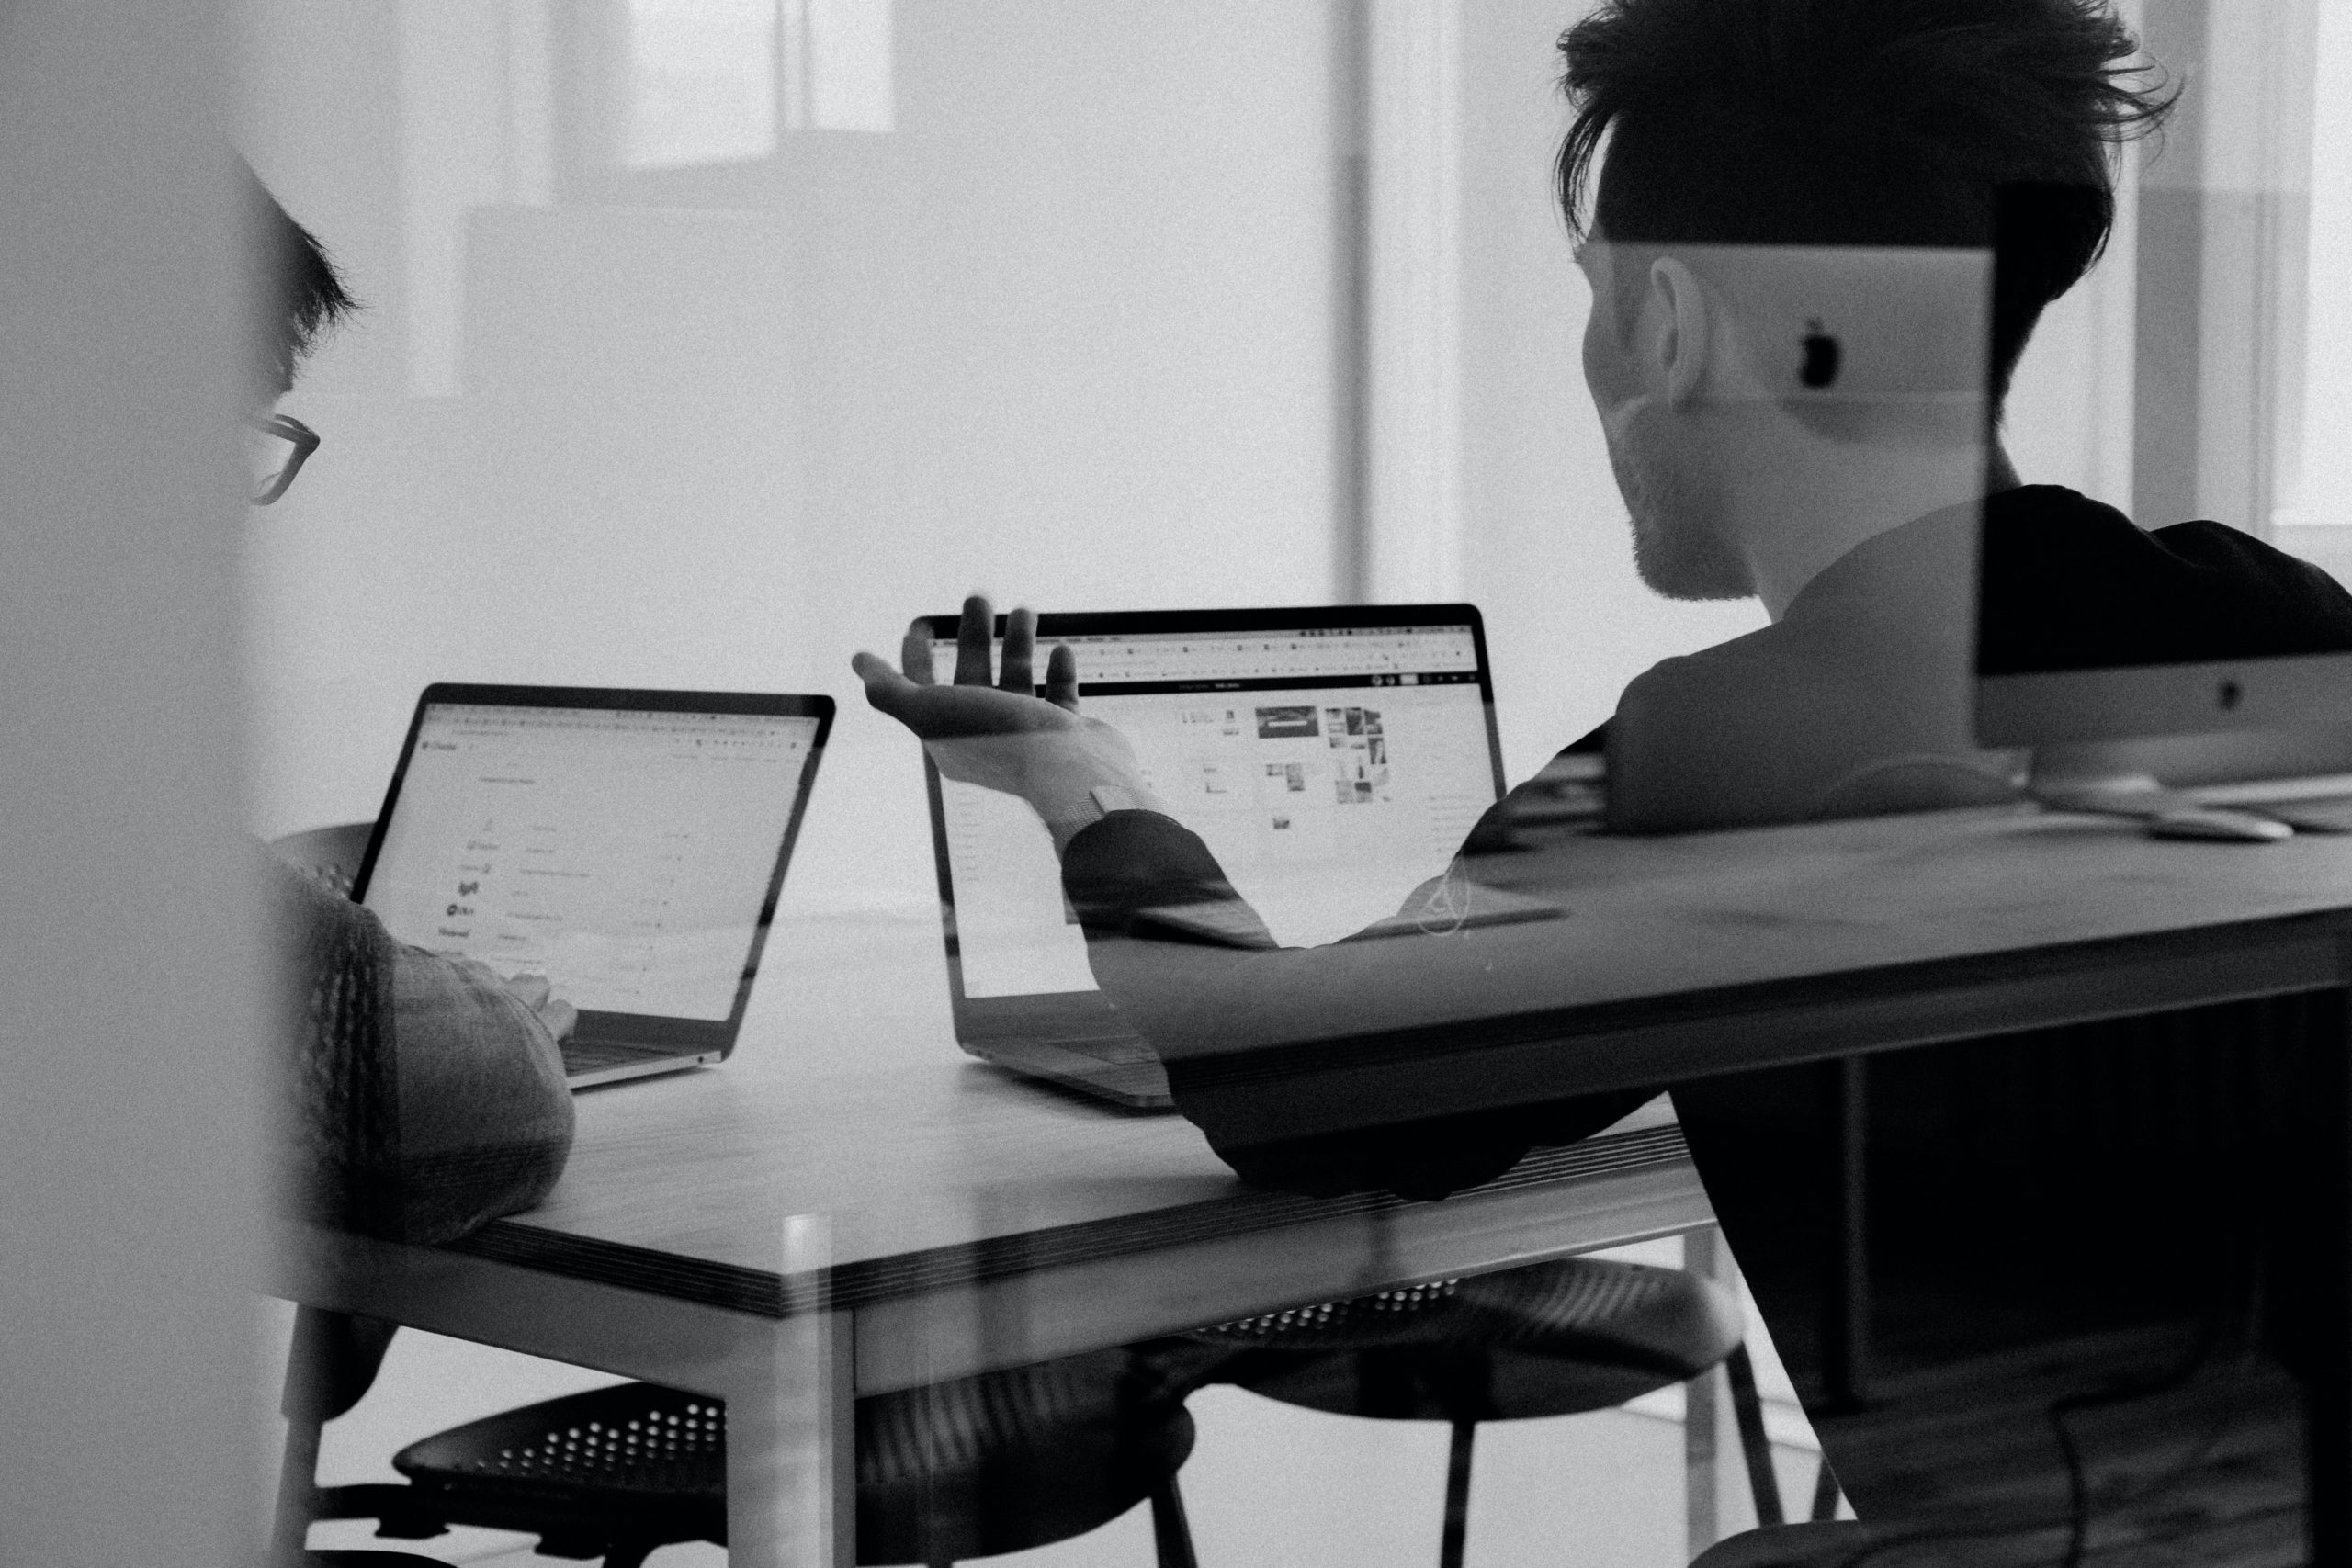 image showing two peope in a discussion whilst using laptops